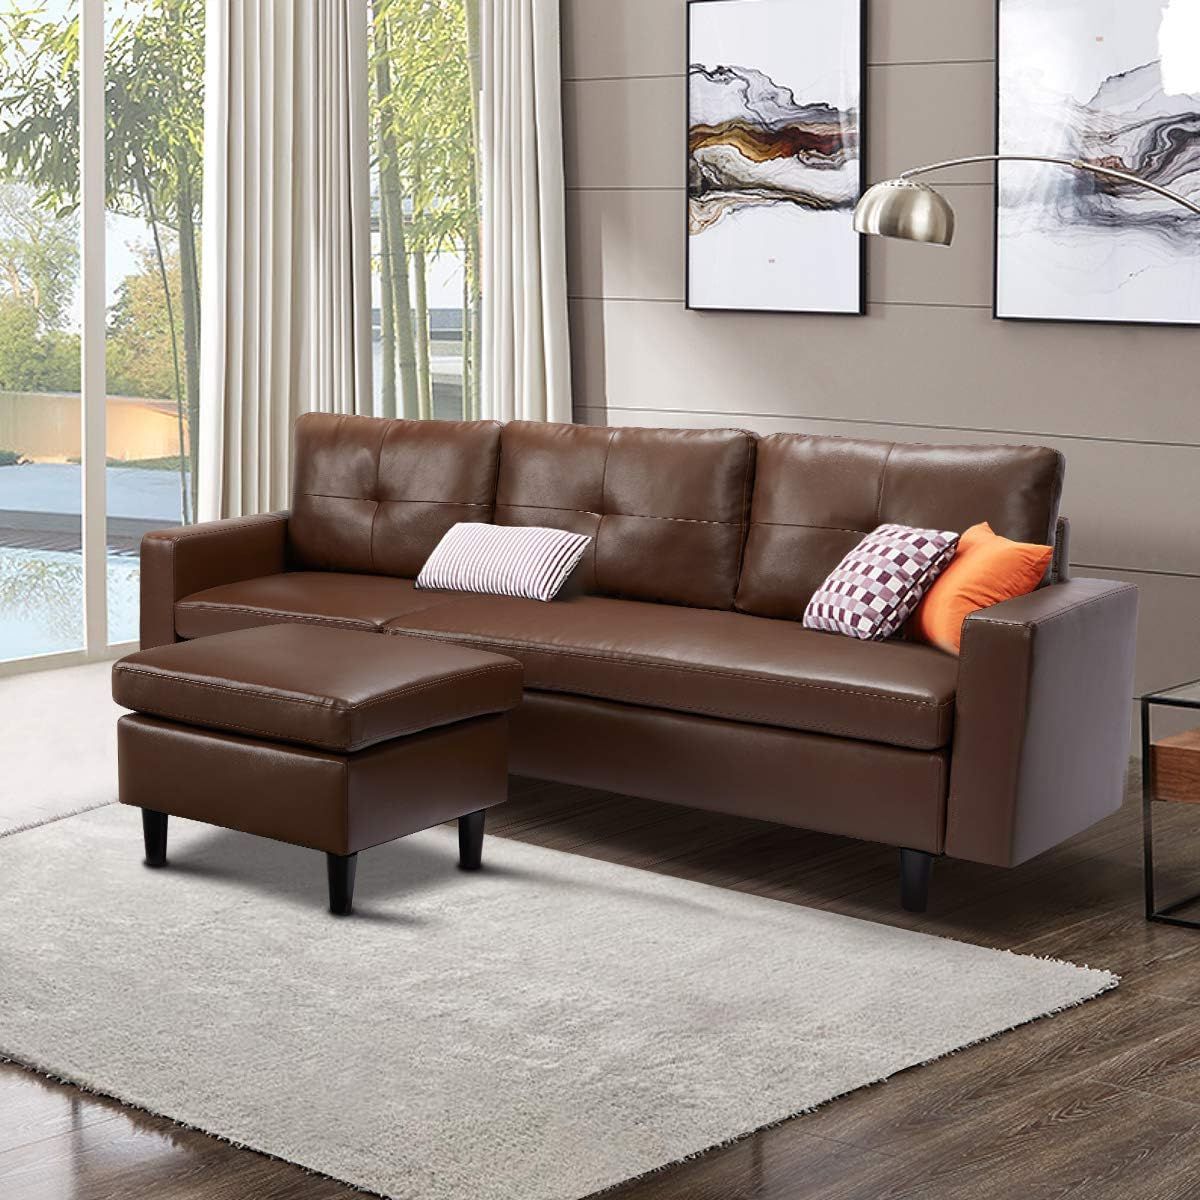 Faux Leather Sectional Sofa Sets In Well Known Esright Faux Leather Sectional Sofa Convertible Couch Brown Leather L (View 8 of 15)